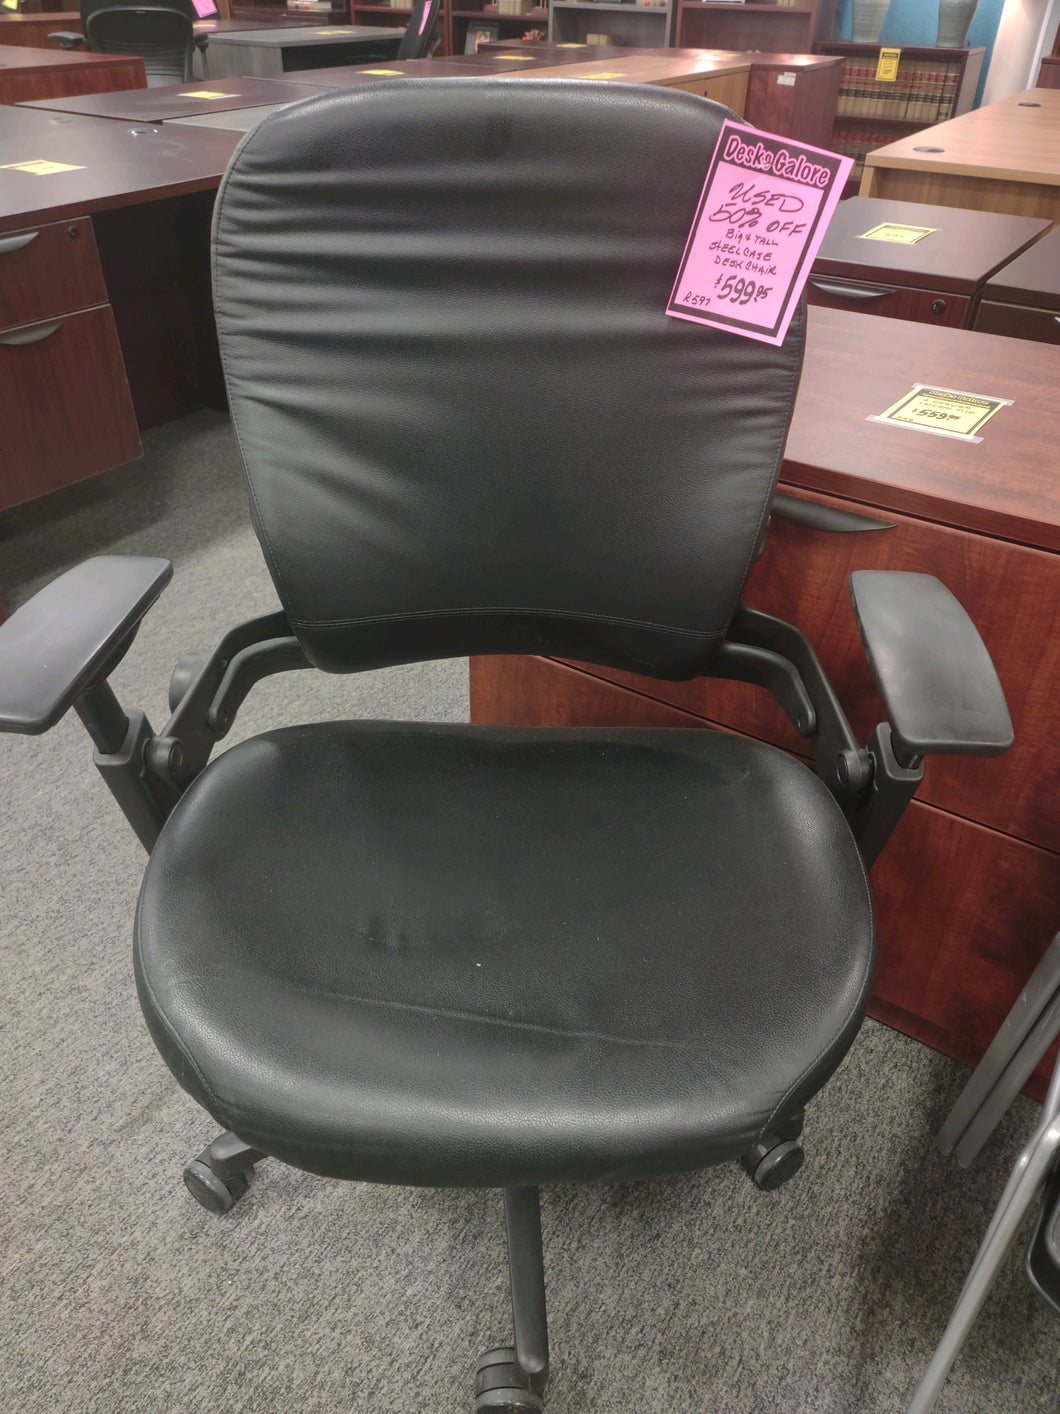 Steel Case Big & Tall Used Office Chairs $299.98 – Desks Galore